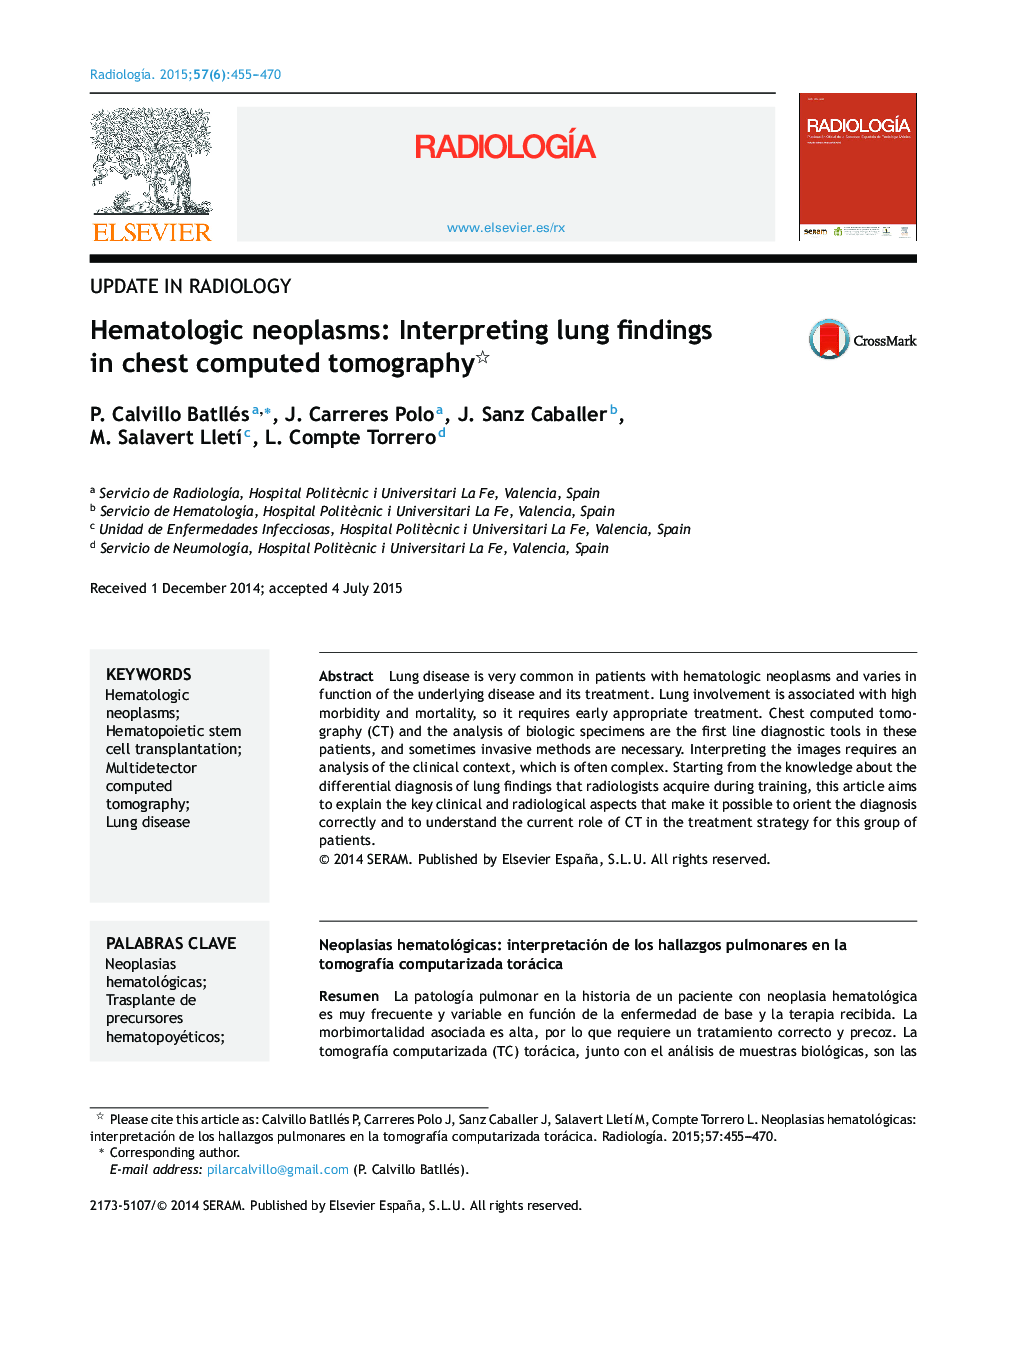 Hematologic neoplasms: Interpreting lung findings in chest computed tomography 